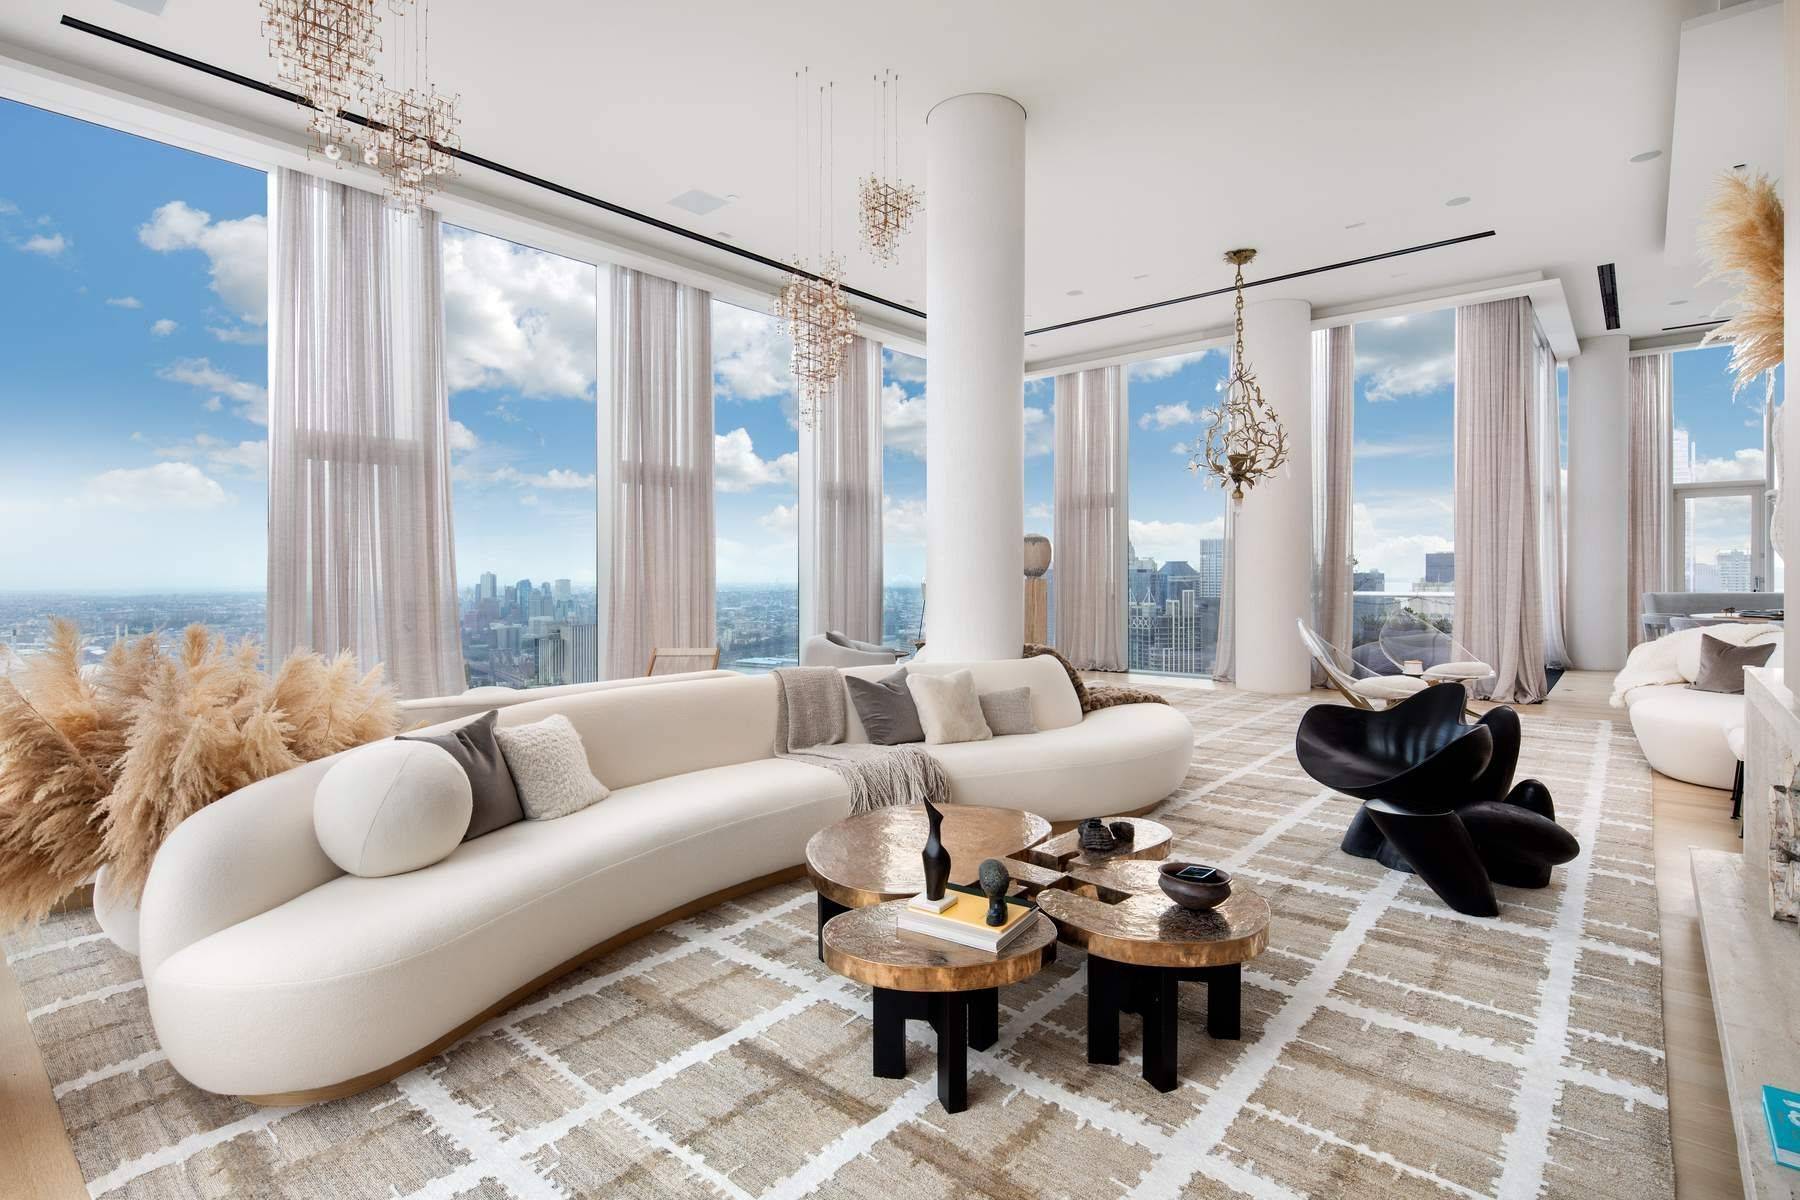 Rare opportunity to own a spectacular, one of a kind, full floor Penthouse in the heart of Tribeca, perched above the clouds on the 58th floor.